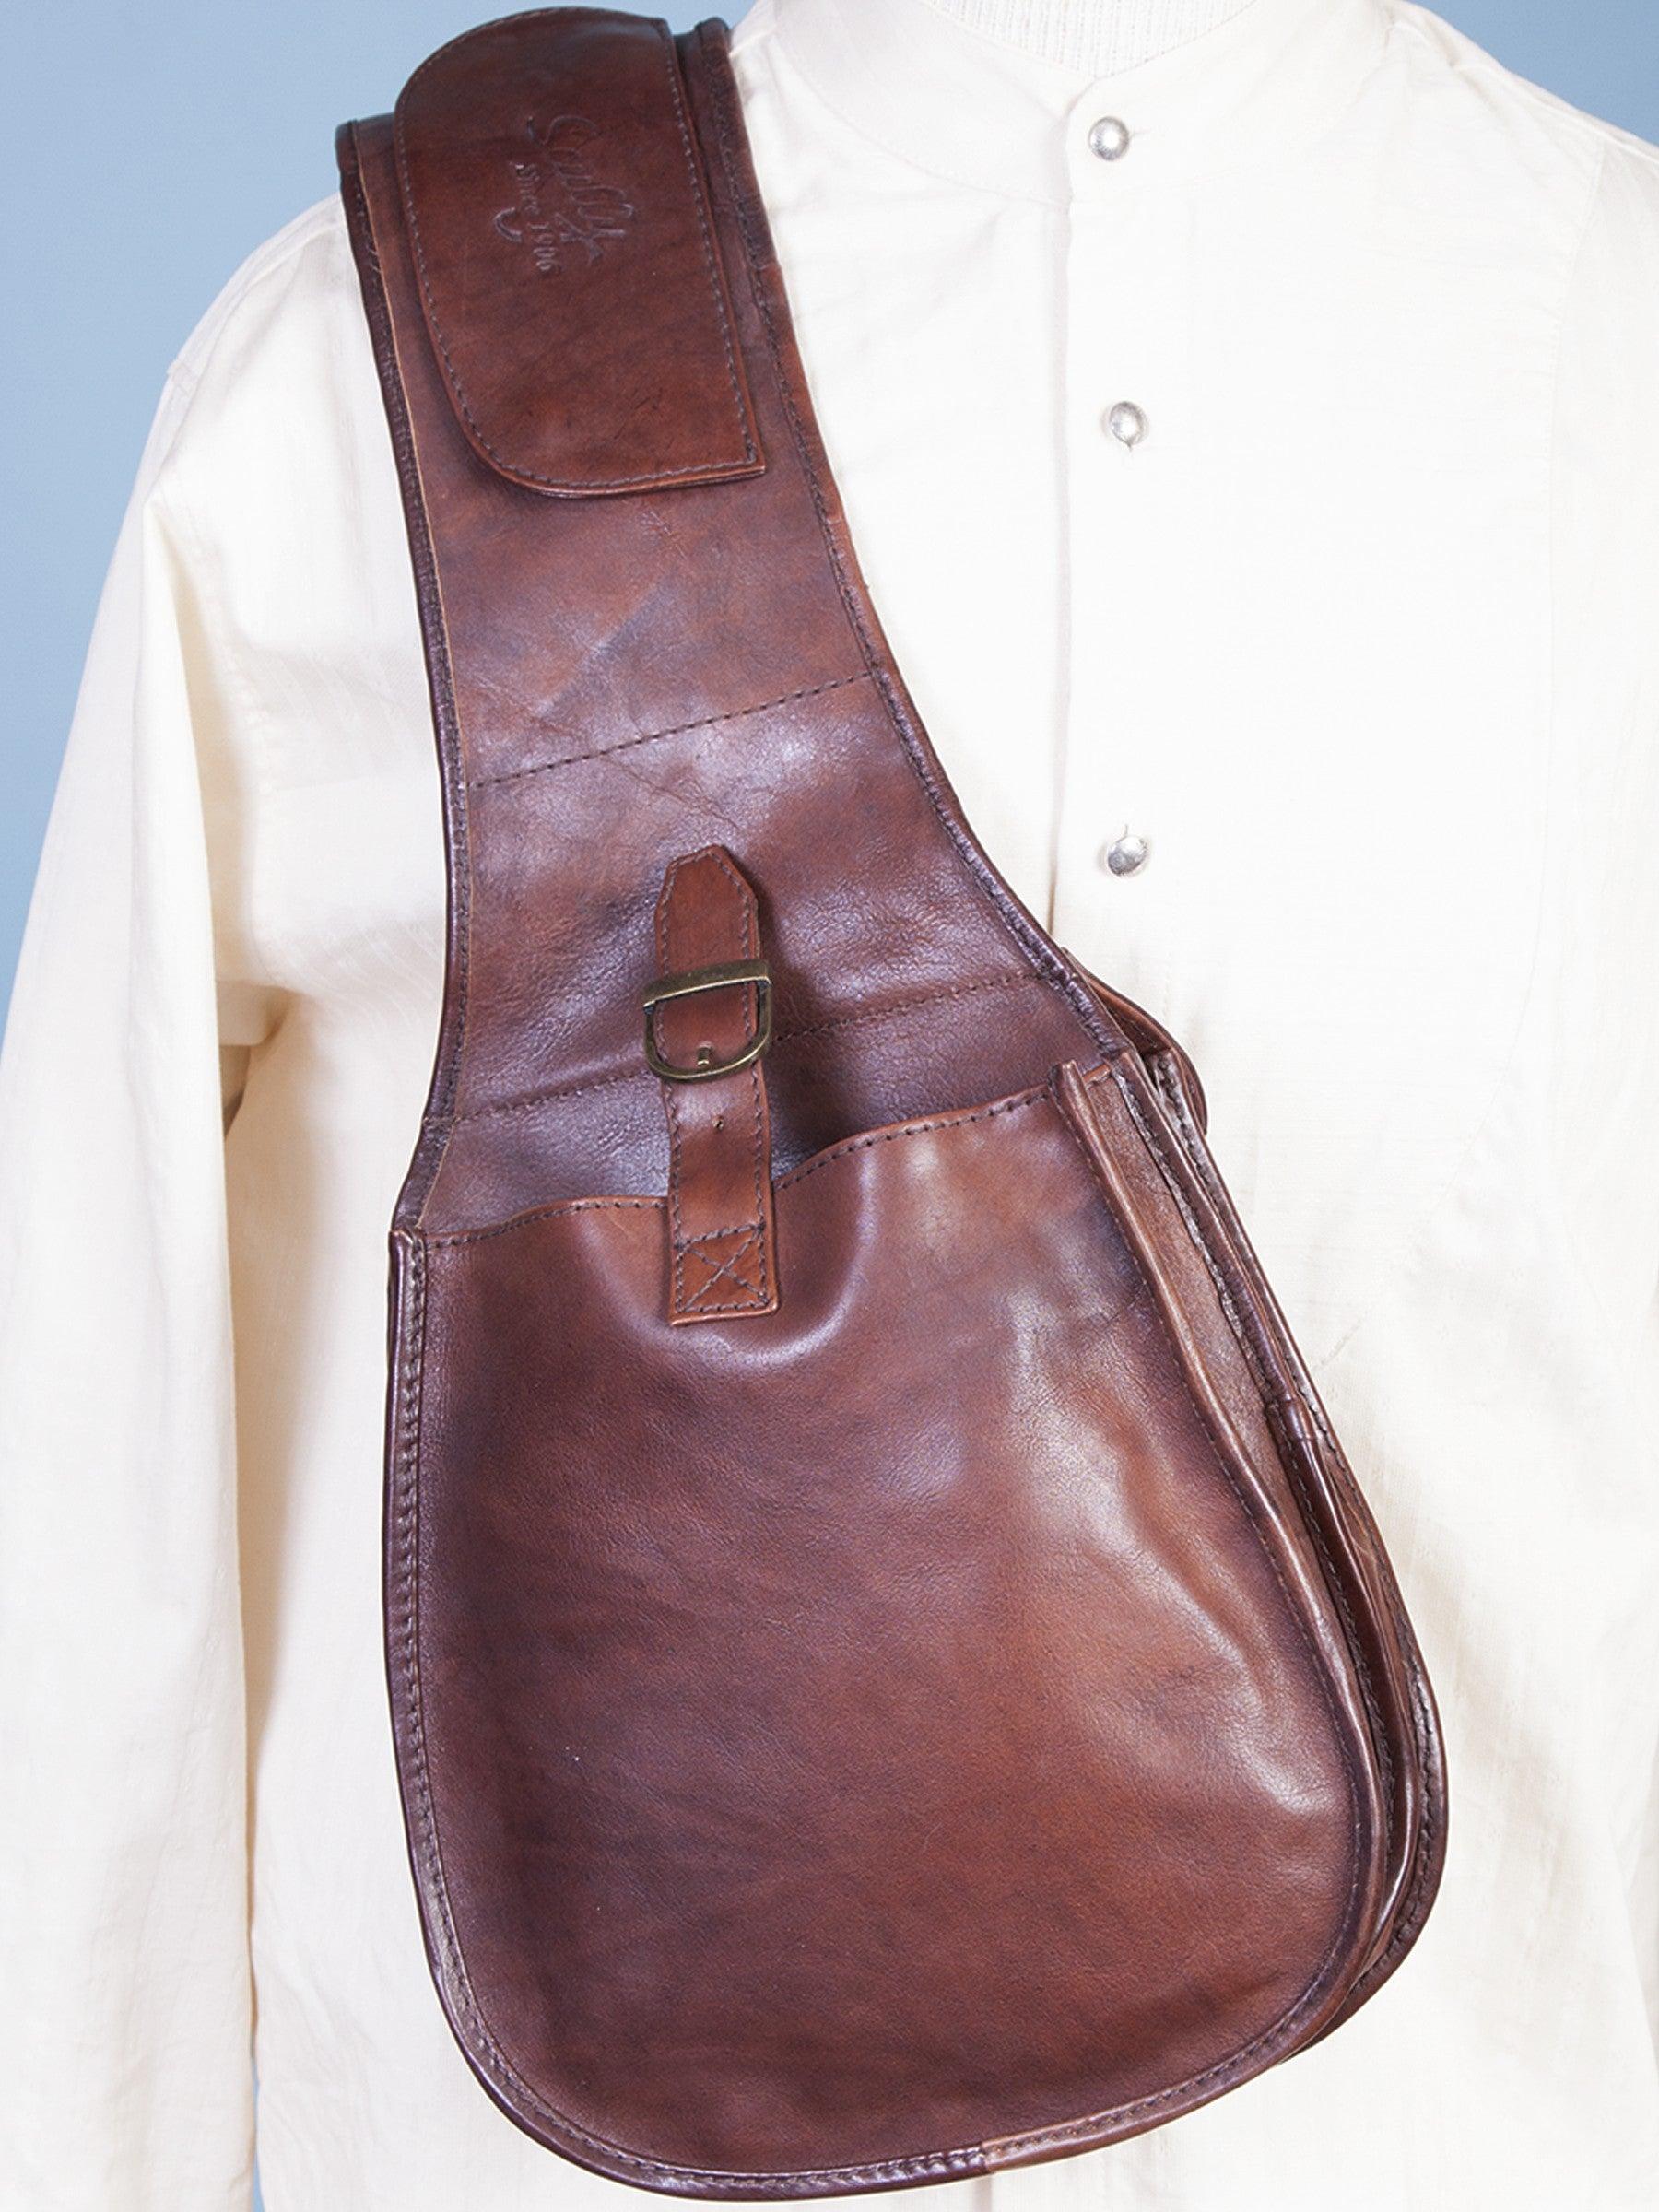 Scully Our classic saddle bag - Flyclothing LLC